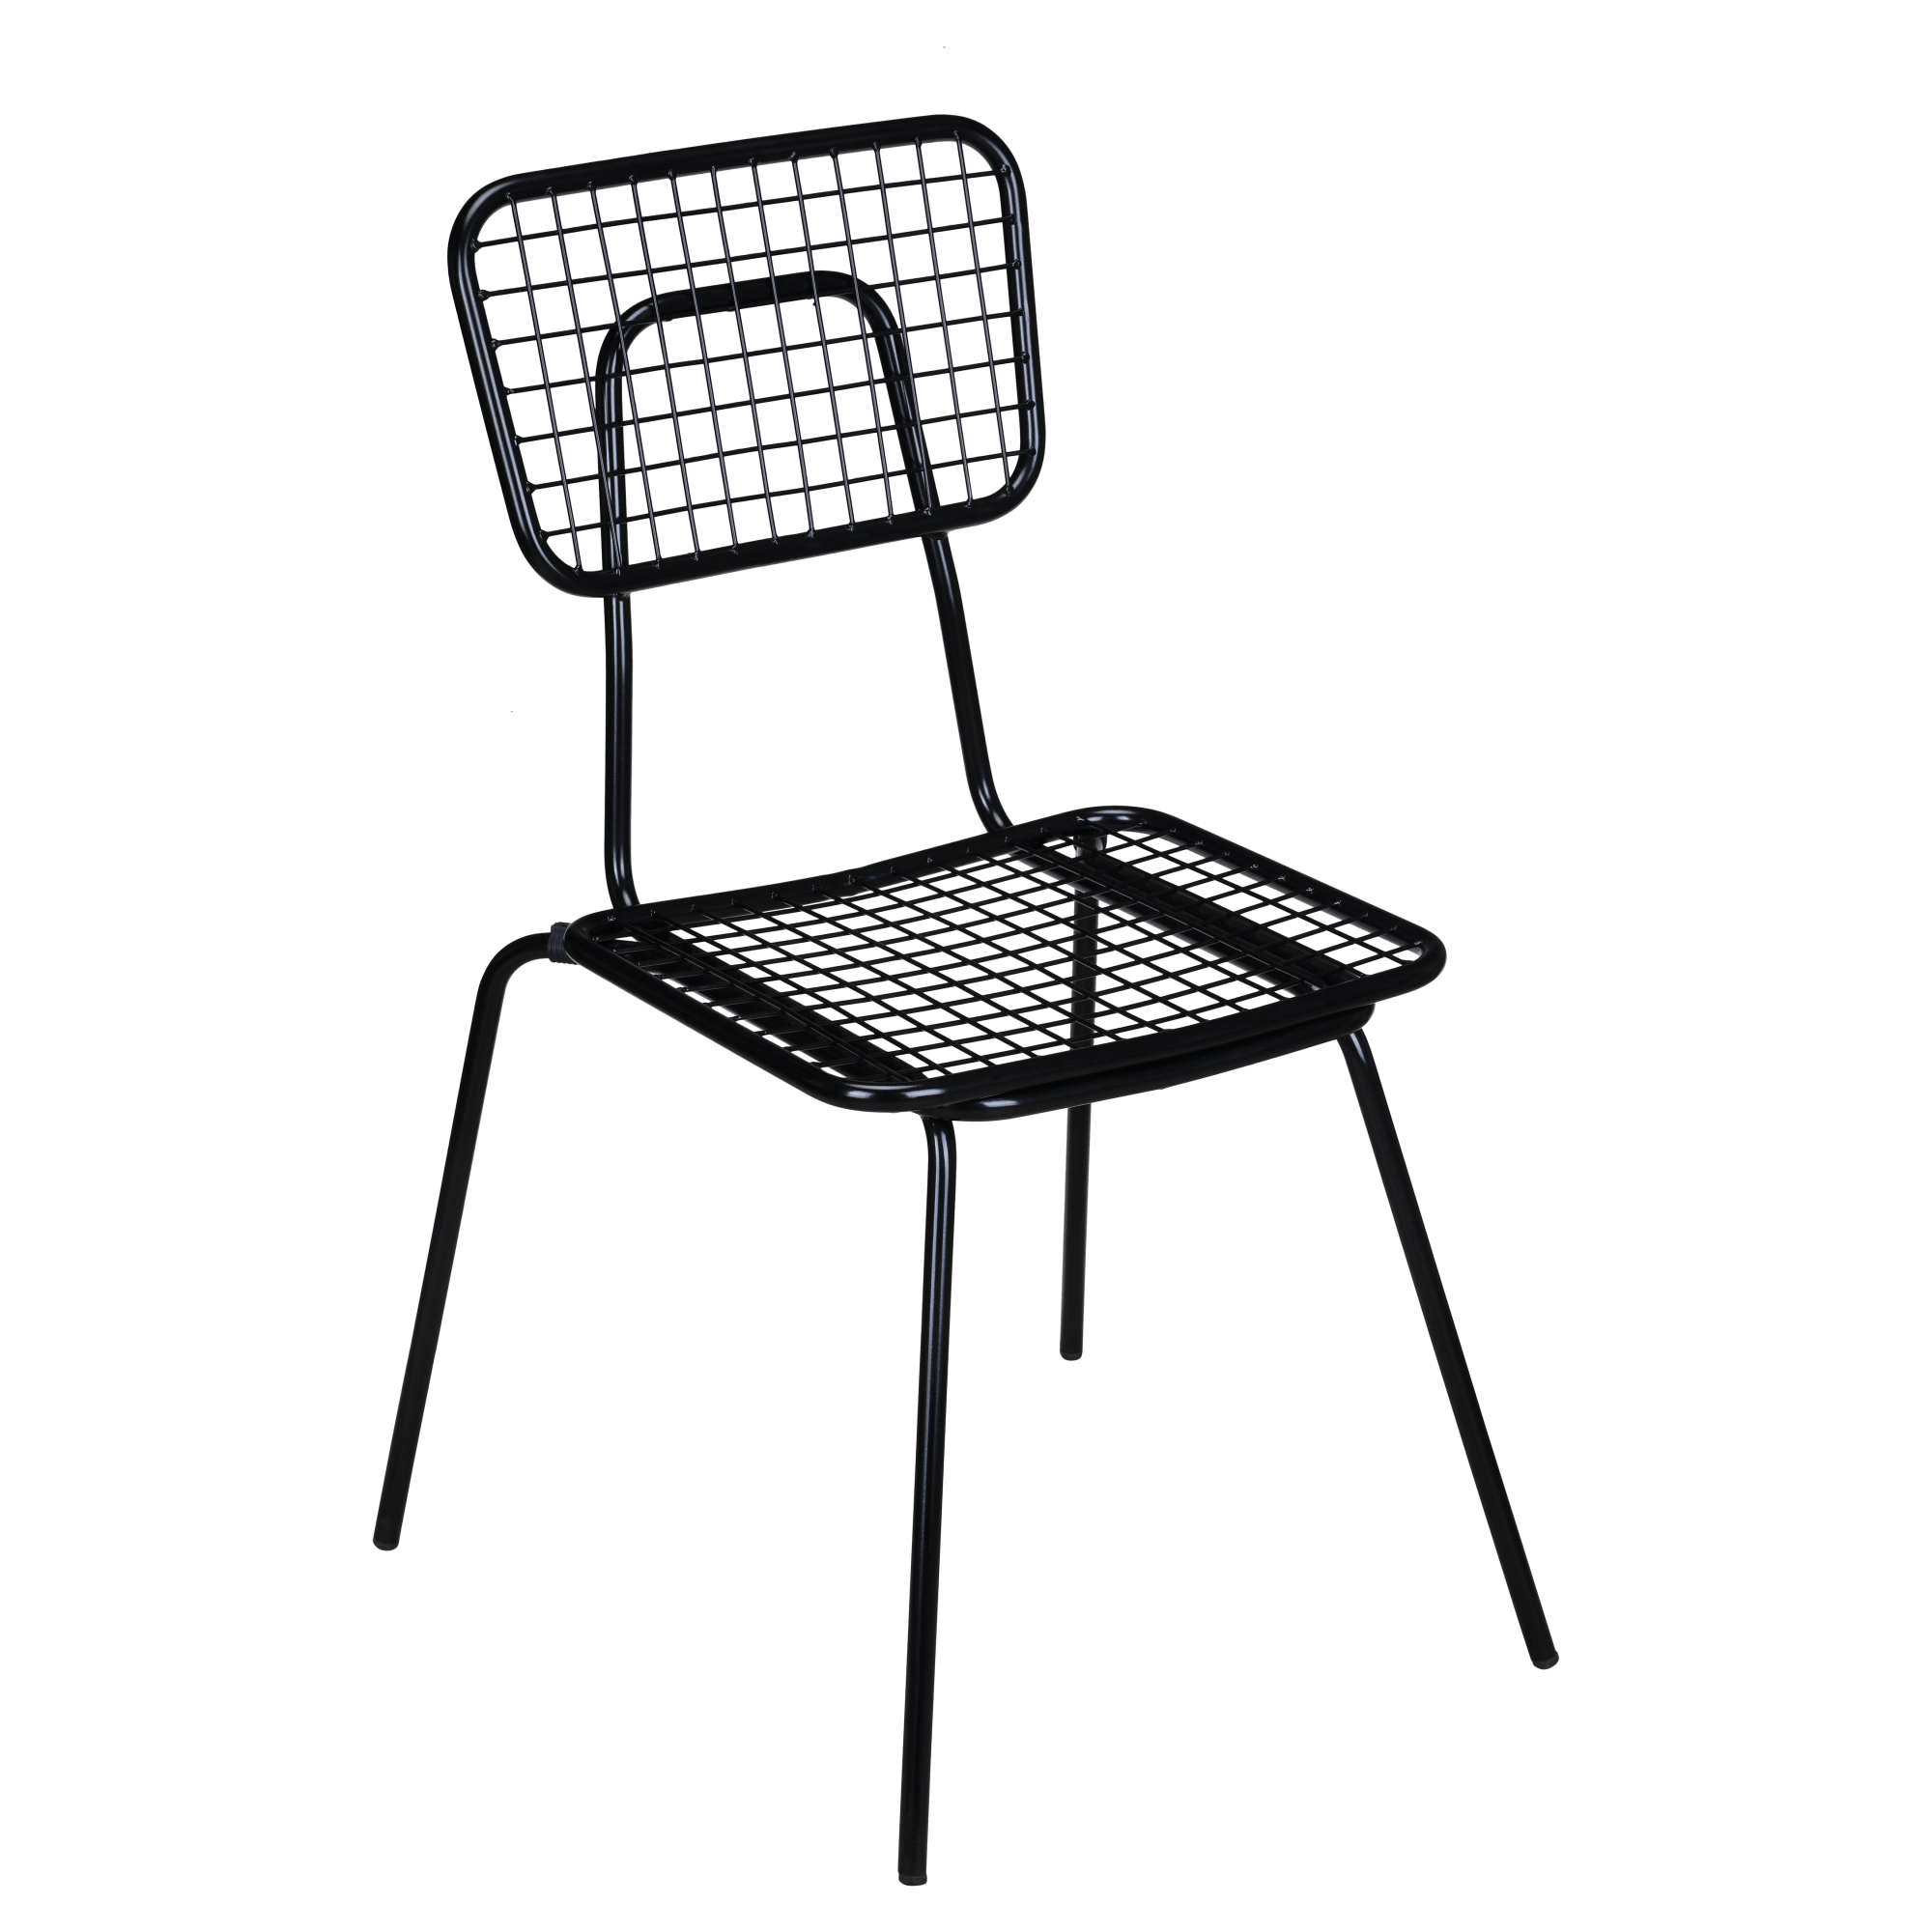 Ollie Patio Chair in Black Finish